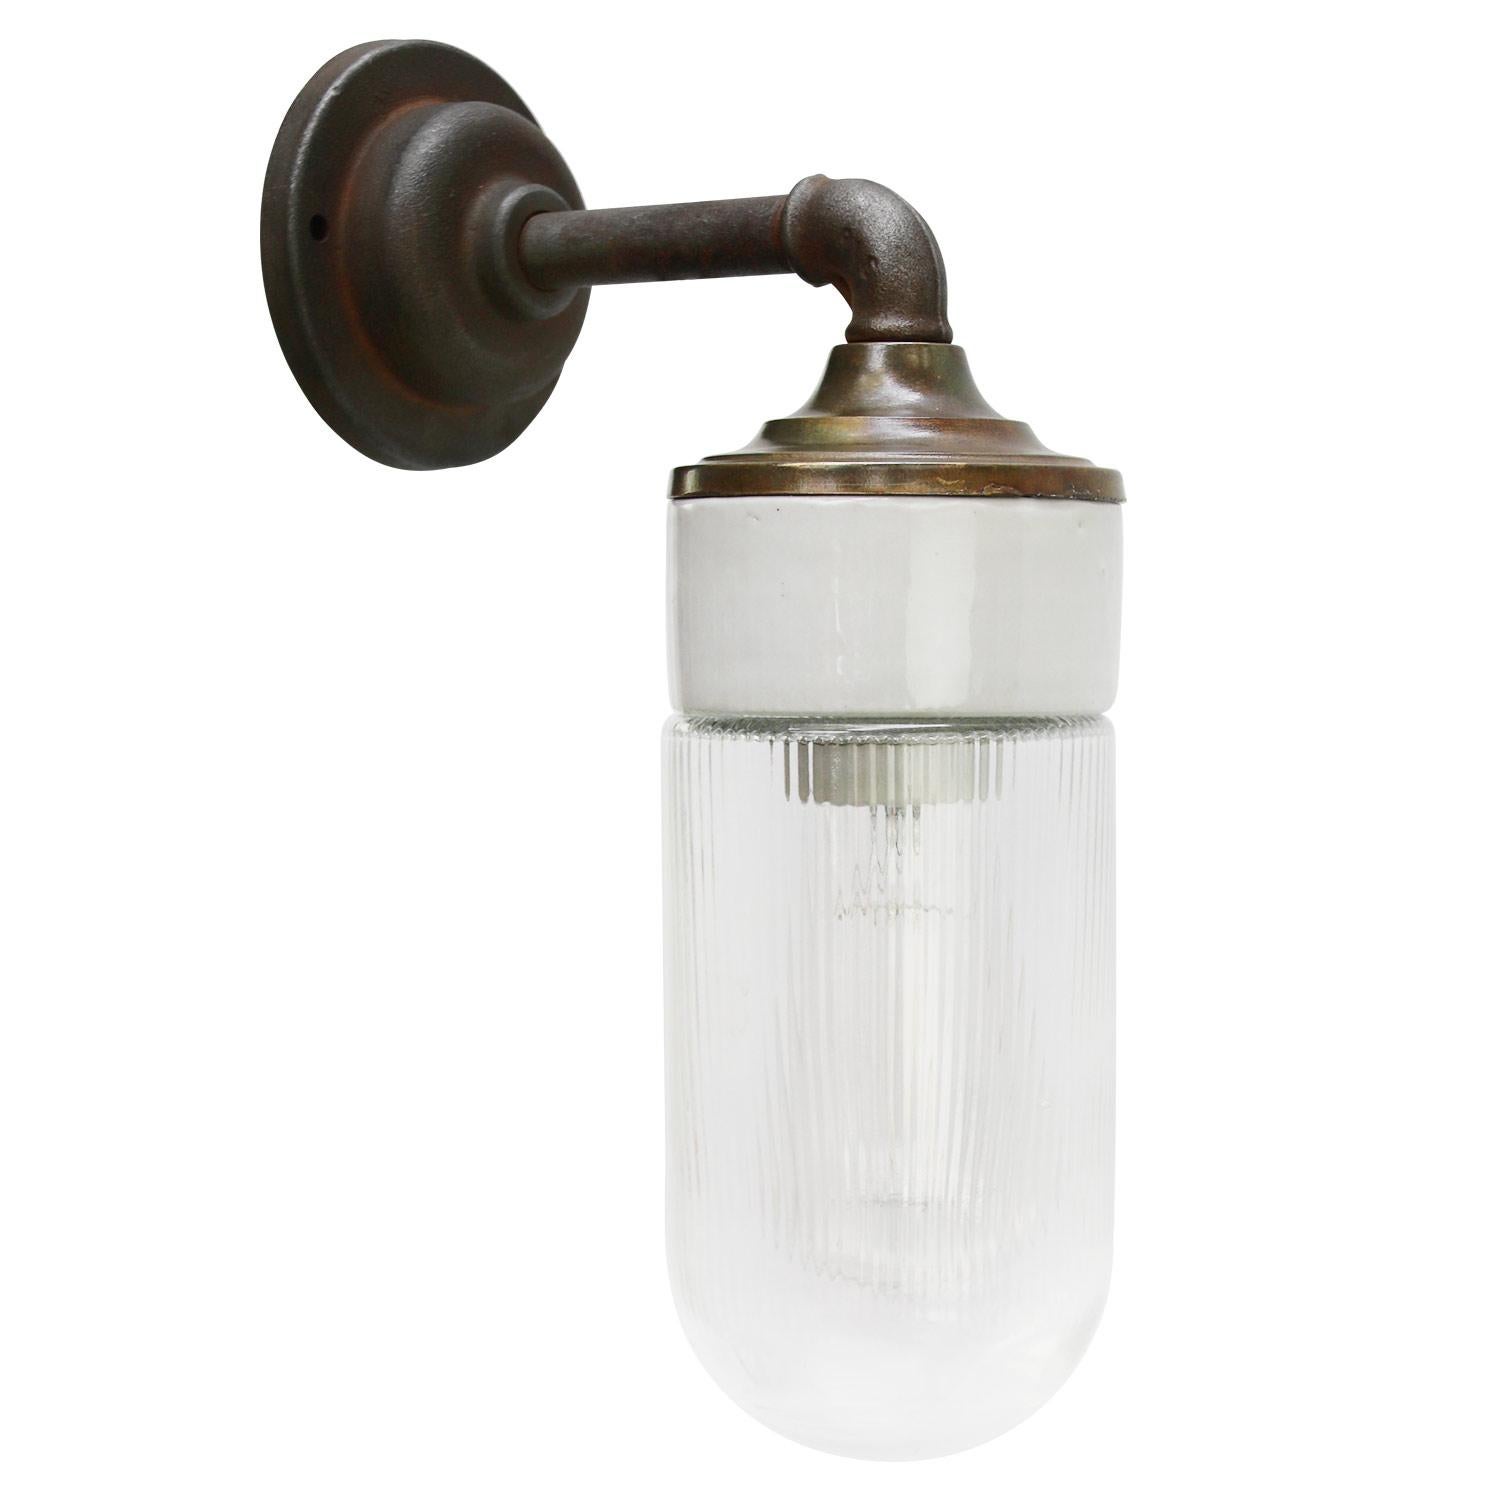 Porcelain Industrial wall lamp.
White porcelain, brass and cast iron
Clear striped glass.
2 conductors, no ground.

Diameter cast iron wall piece 10 cm. 2 holes to secure.

Weight: 1.95 kg / 4.3 lb

Priced per individual item. All lamps